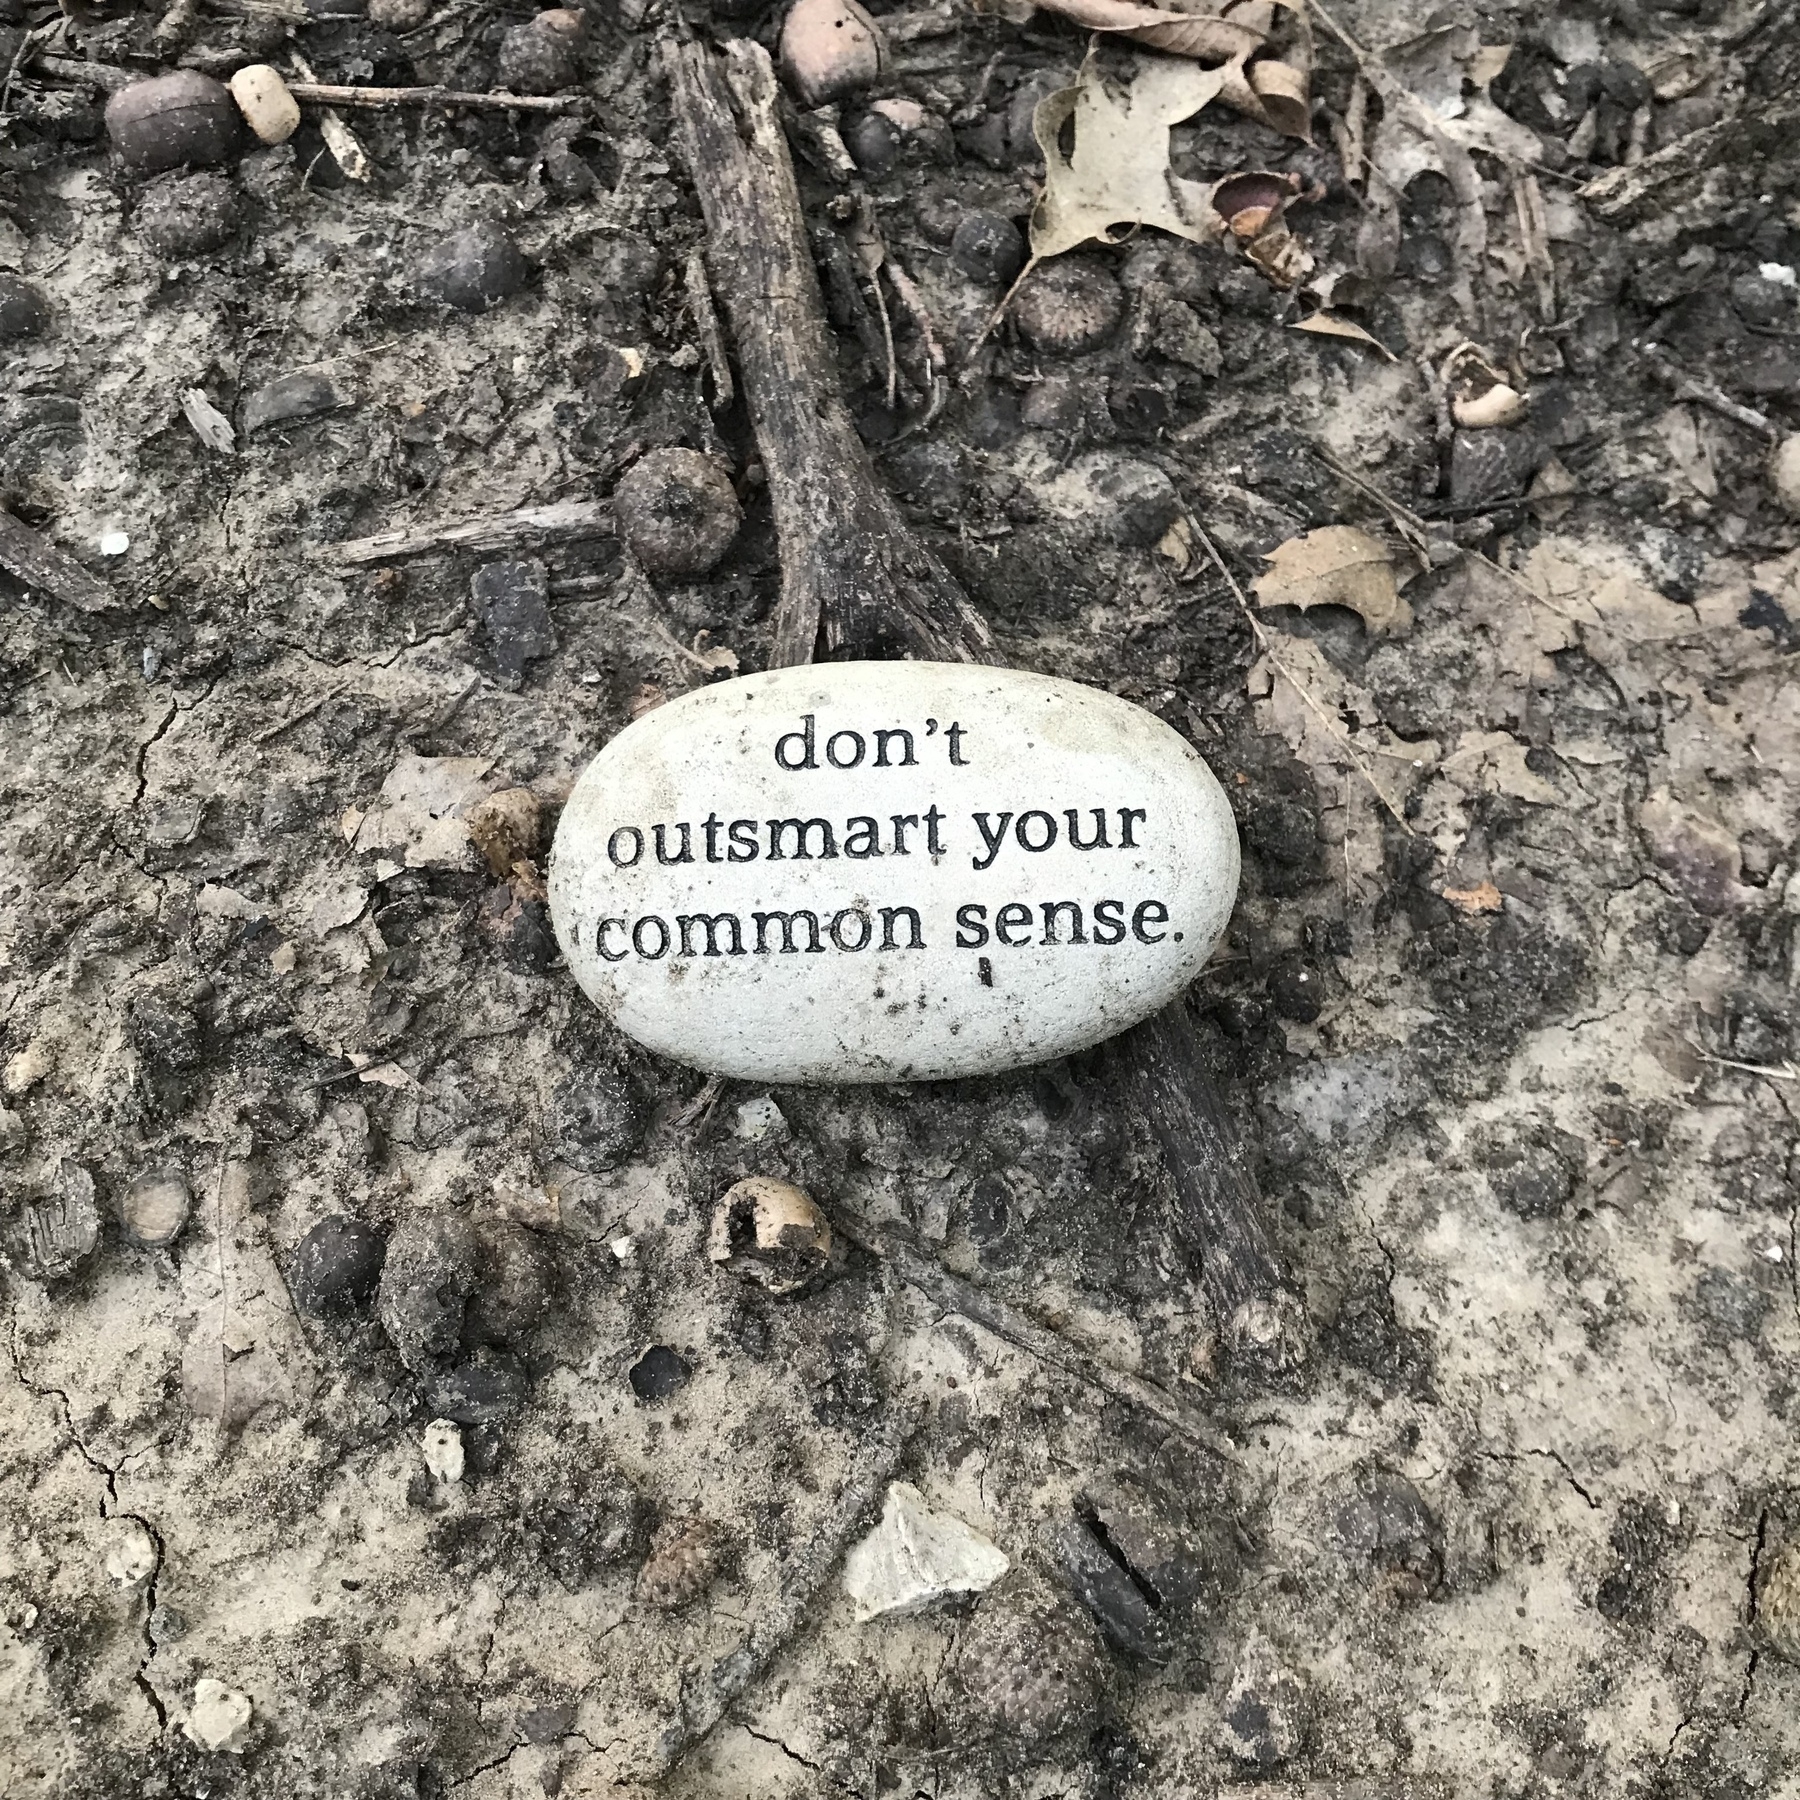 A rock at the Parr Park Art Rock Trail painted with “don’t outsmart your common sense”